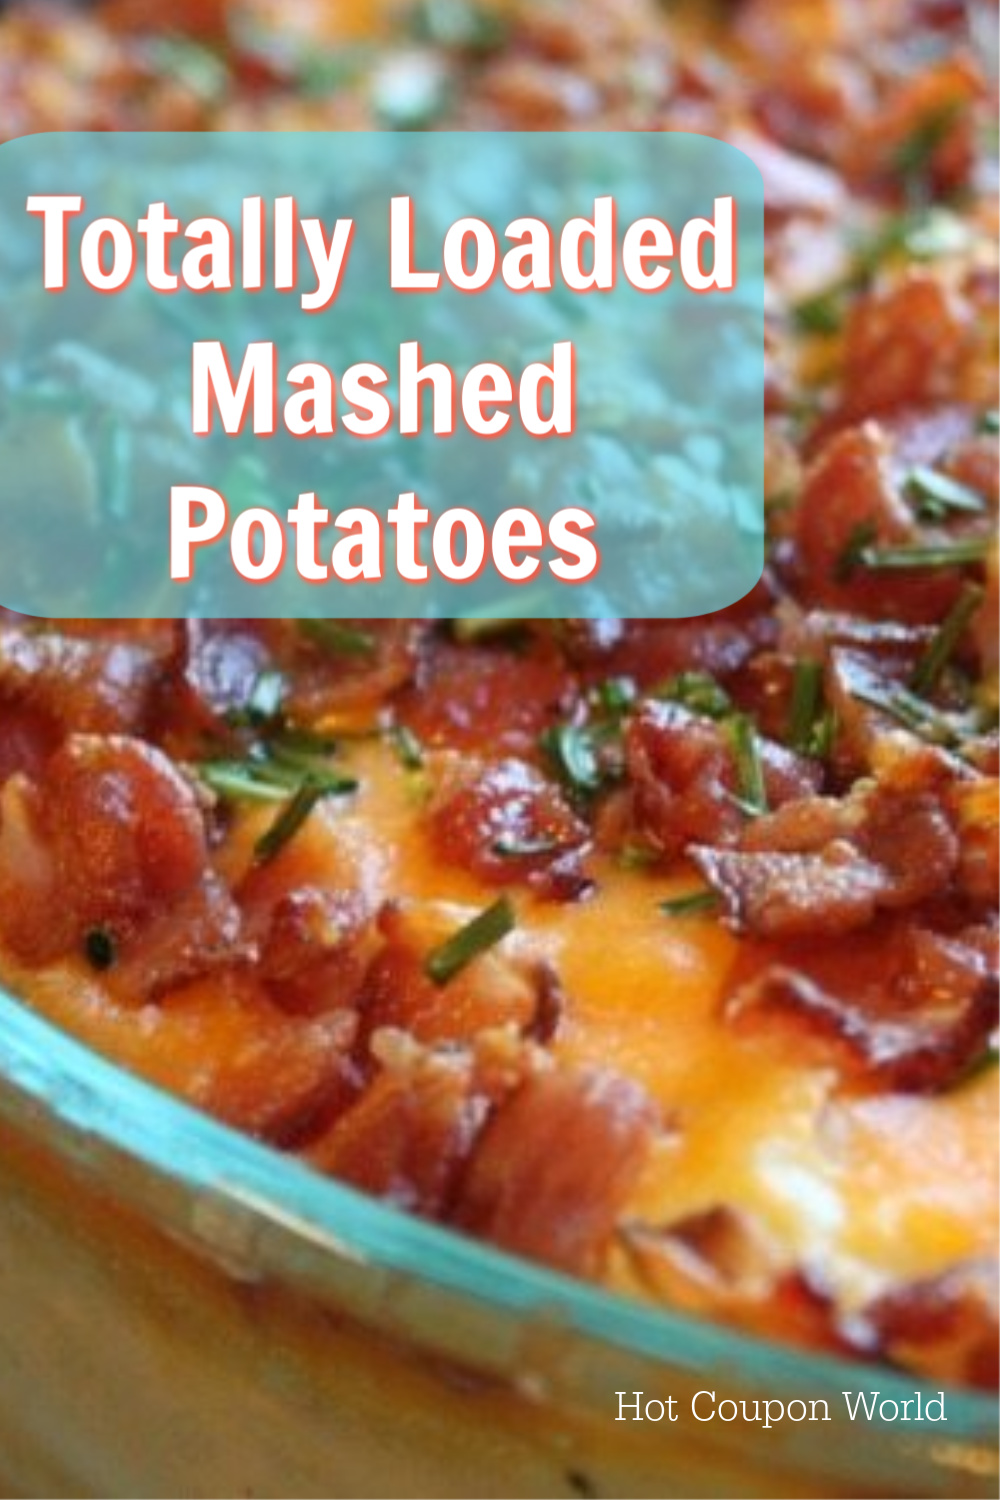 mashed potatoes recipe - totally loaded potatoes with bacon